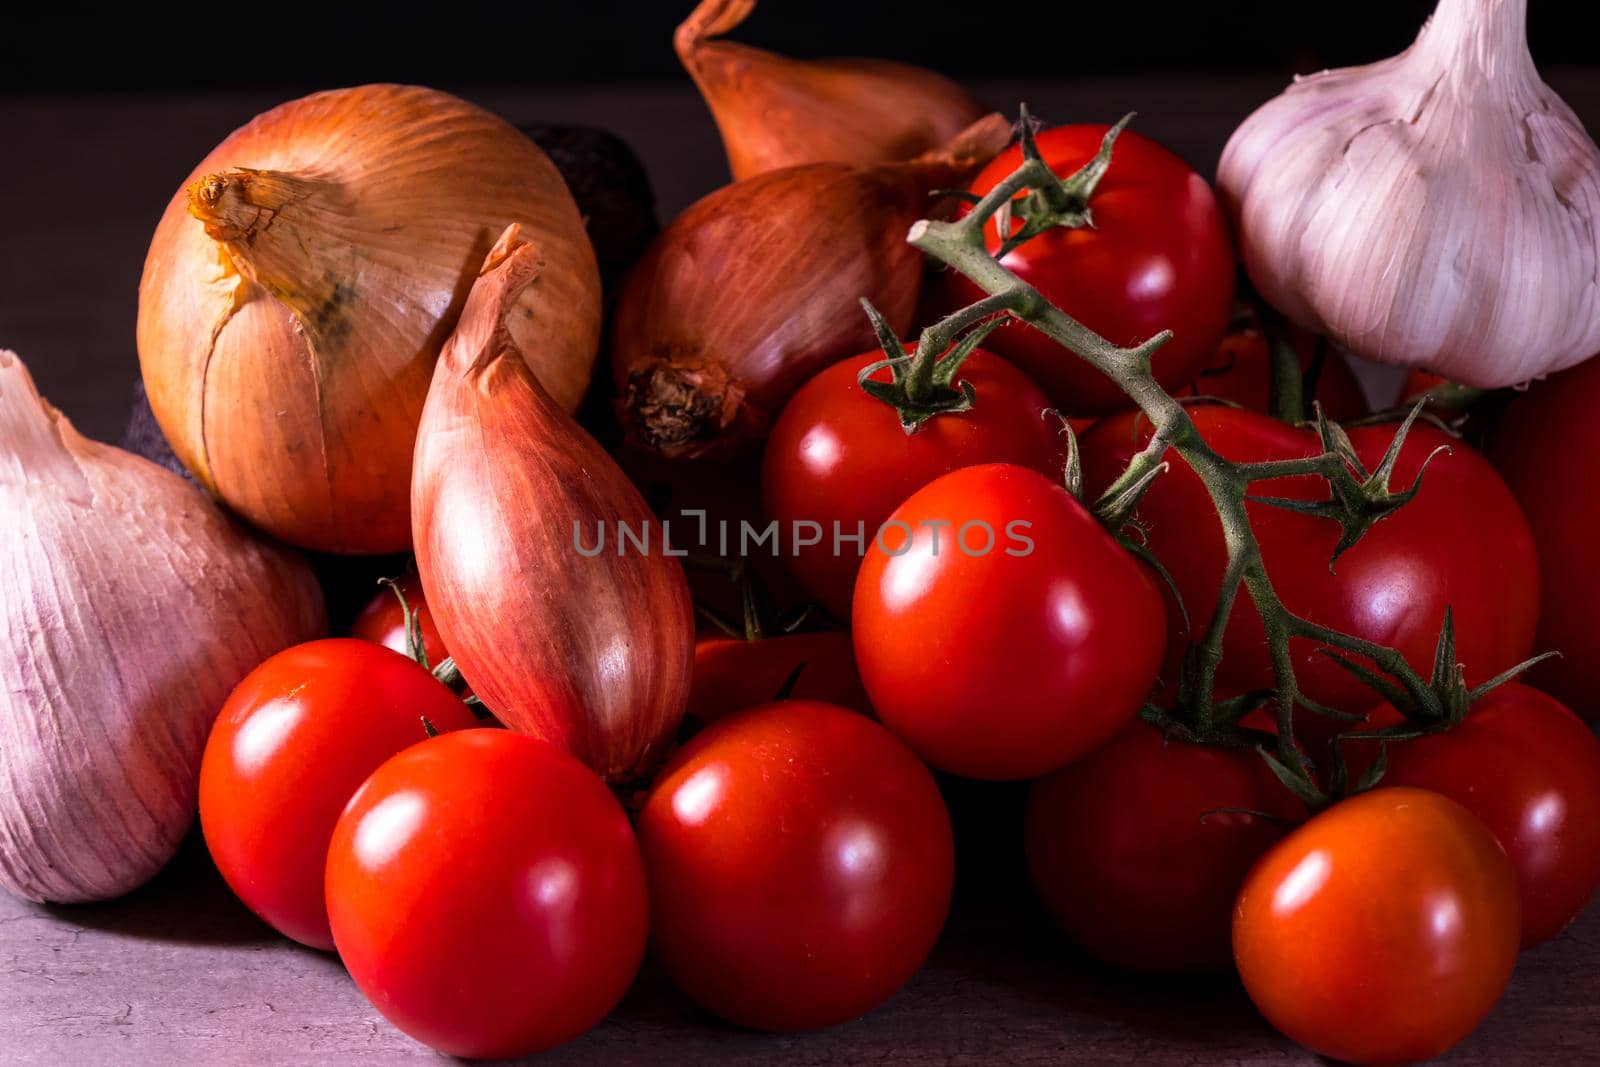 assorted garlic tomatoes and onions for a kitchen decoration poster